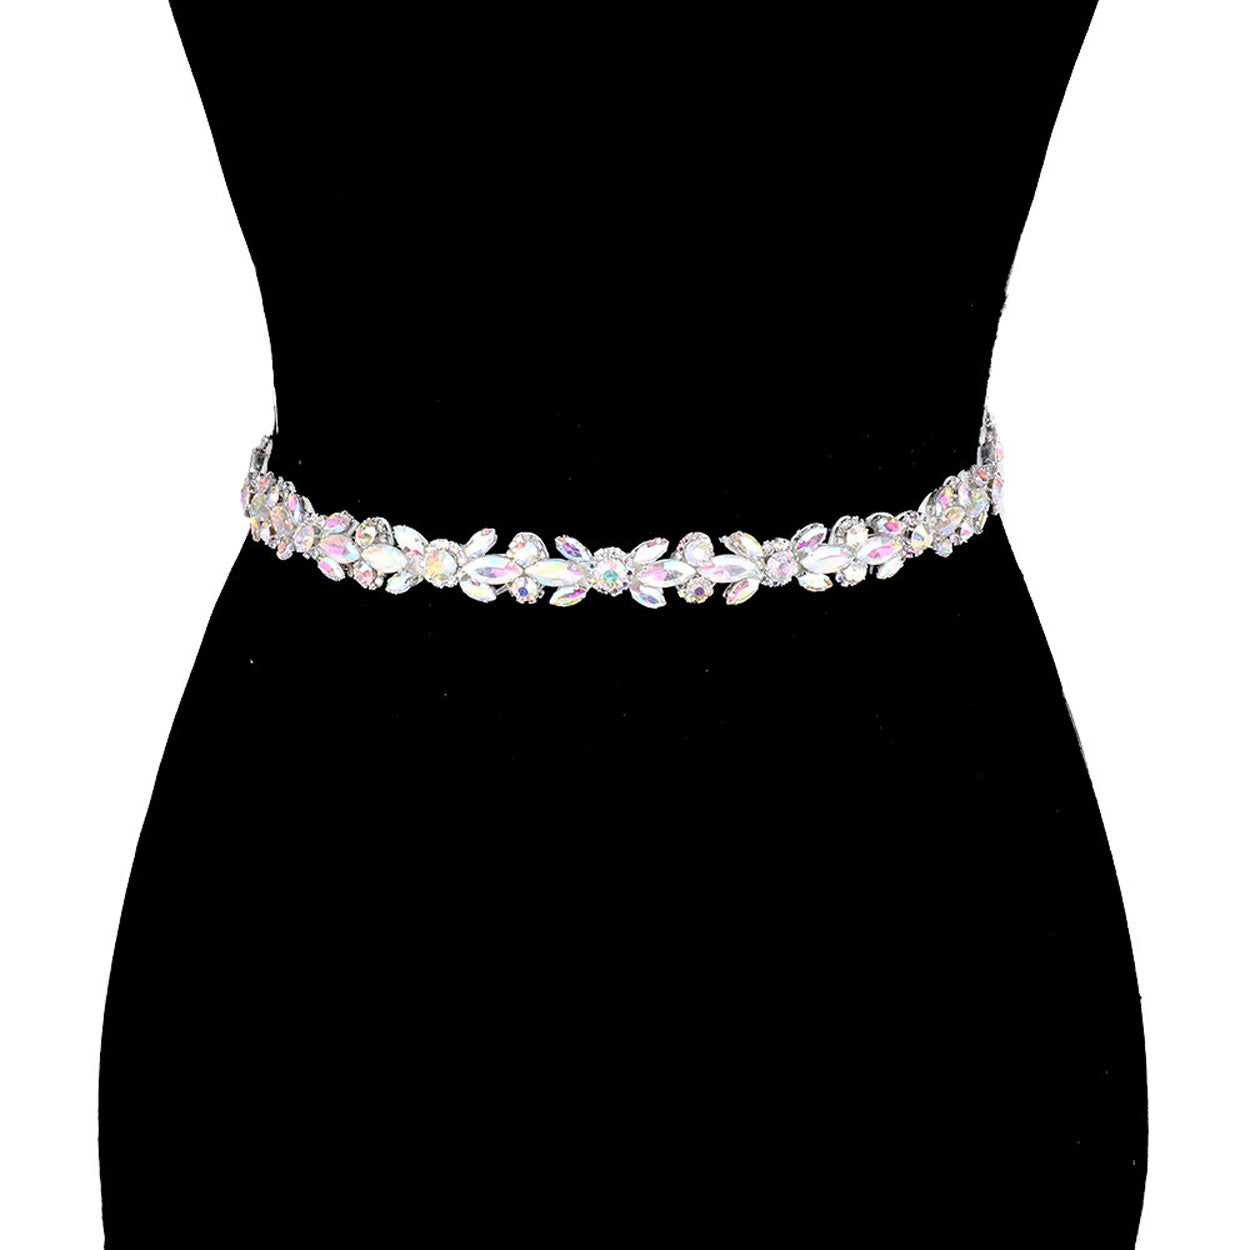 AB Silver Crystal Marquise Sash Ribbon Bridal Wedding Belt Headband, crystal applique is the newest trend and excellent embellishment for different occasions, especially for the bridal wedding, make you charming and graceful. This is a must have accessory for your very own special day. Perfect for brides, bridal parties, and any other formal occasion.